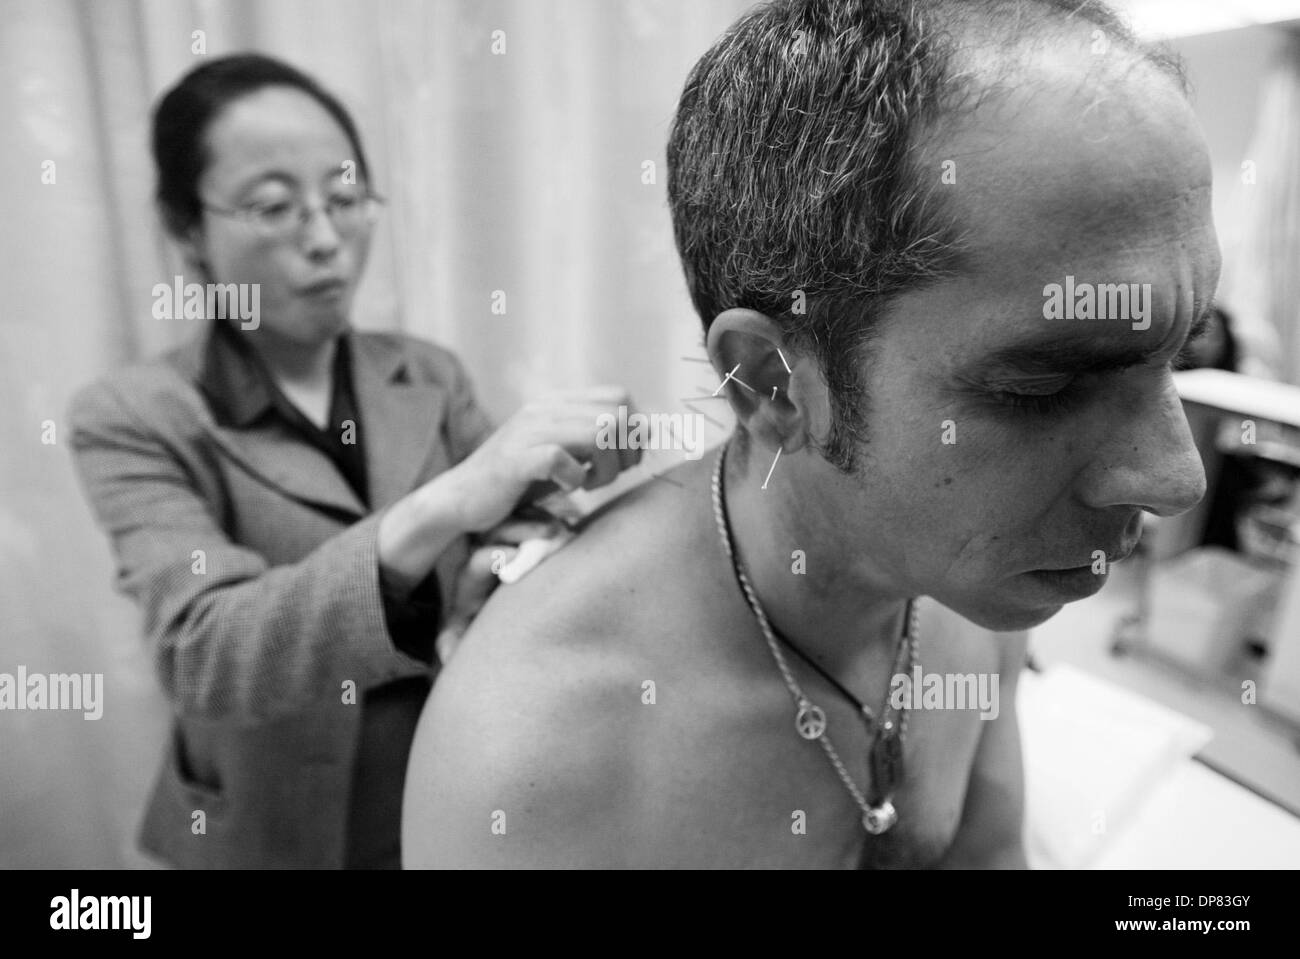 Oct 5, 2006 - San Francisco, CA, USA - Ocular melanoma patient John Shevenell undergoes an acupuncture treatment given by oncologist Dr. Amy Matecki at Alta Bates Summit Comprehensive Cancer Center on Oct. 5, 2006, in Berkeley, Calif. (Credit Image: © Jane Tyska/The Daily Review/ZUMA Press) RESTRICTIONS: USA Tabloid RIGHTS OUT! Stock Photo